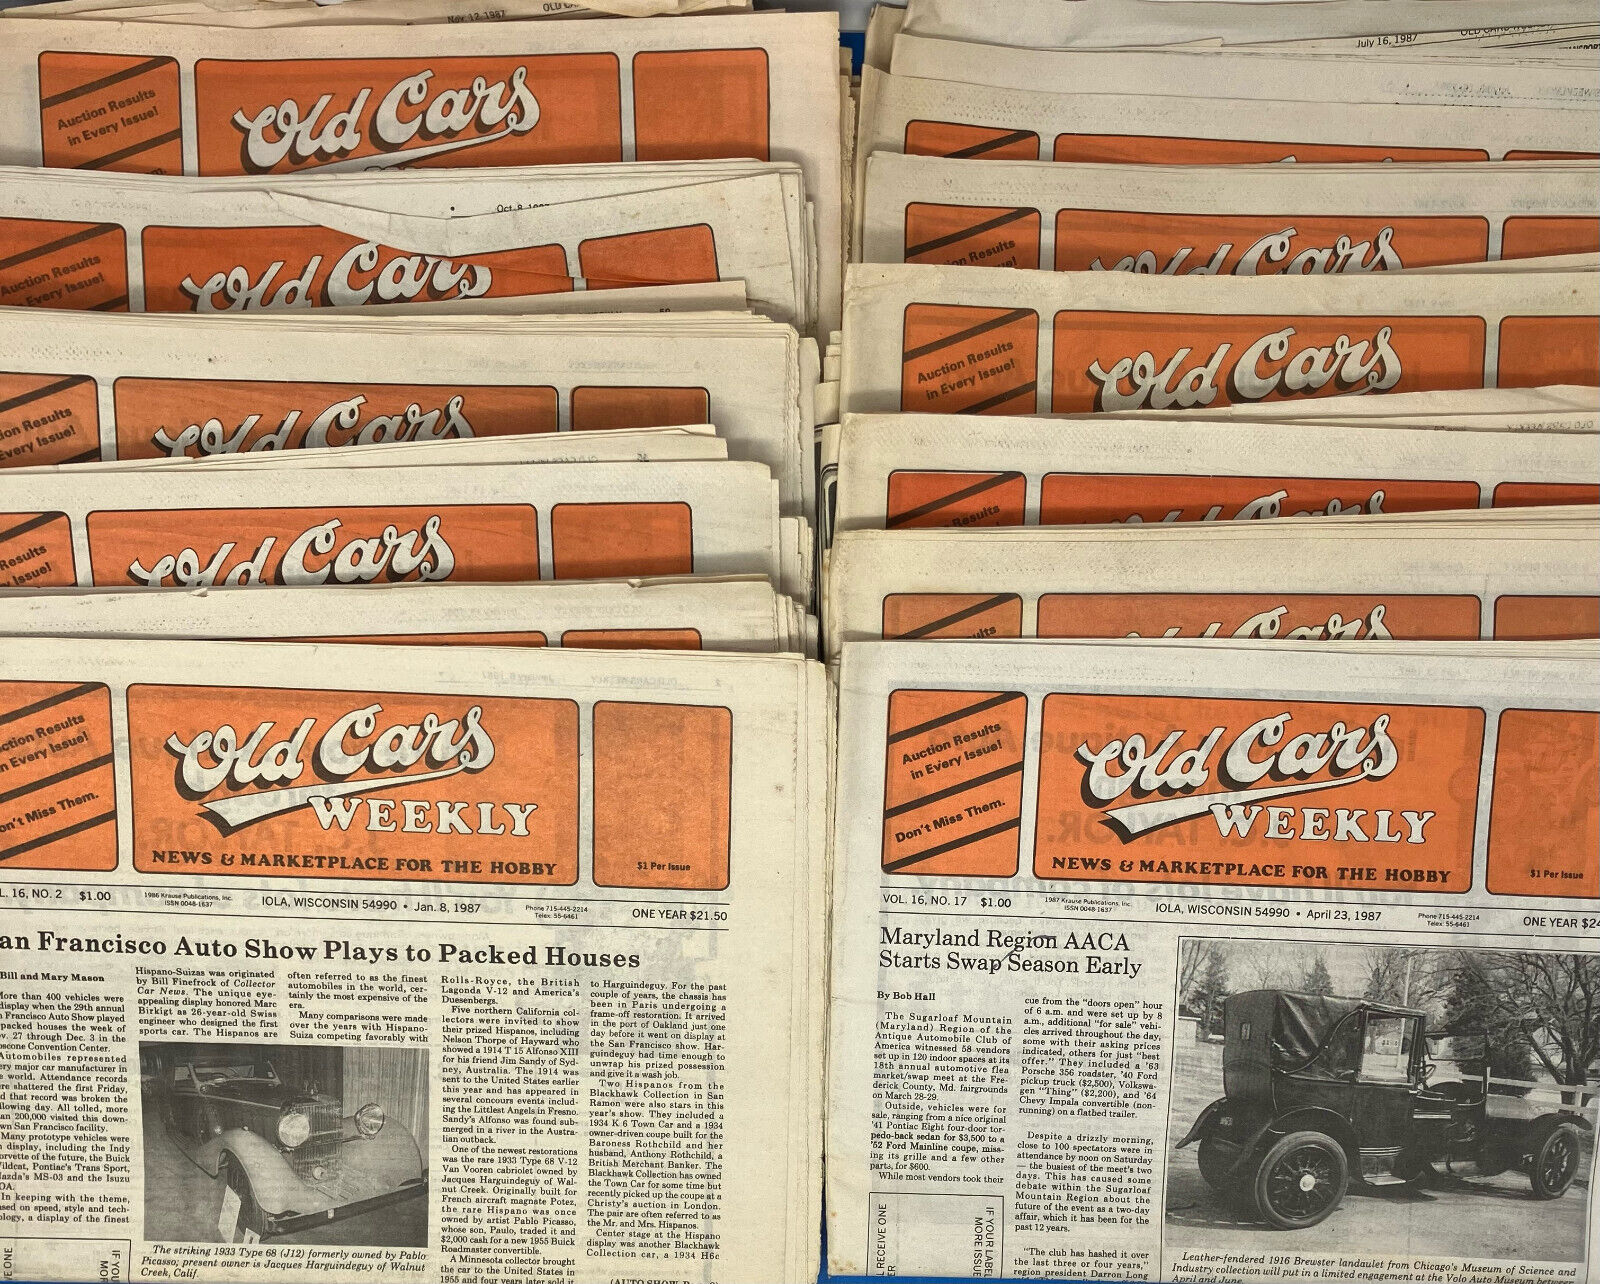 1987, Lot of 17 OLD CARS WEEKLY NEWS & MARKETPLACE, 90 Years of Oldsmobile